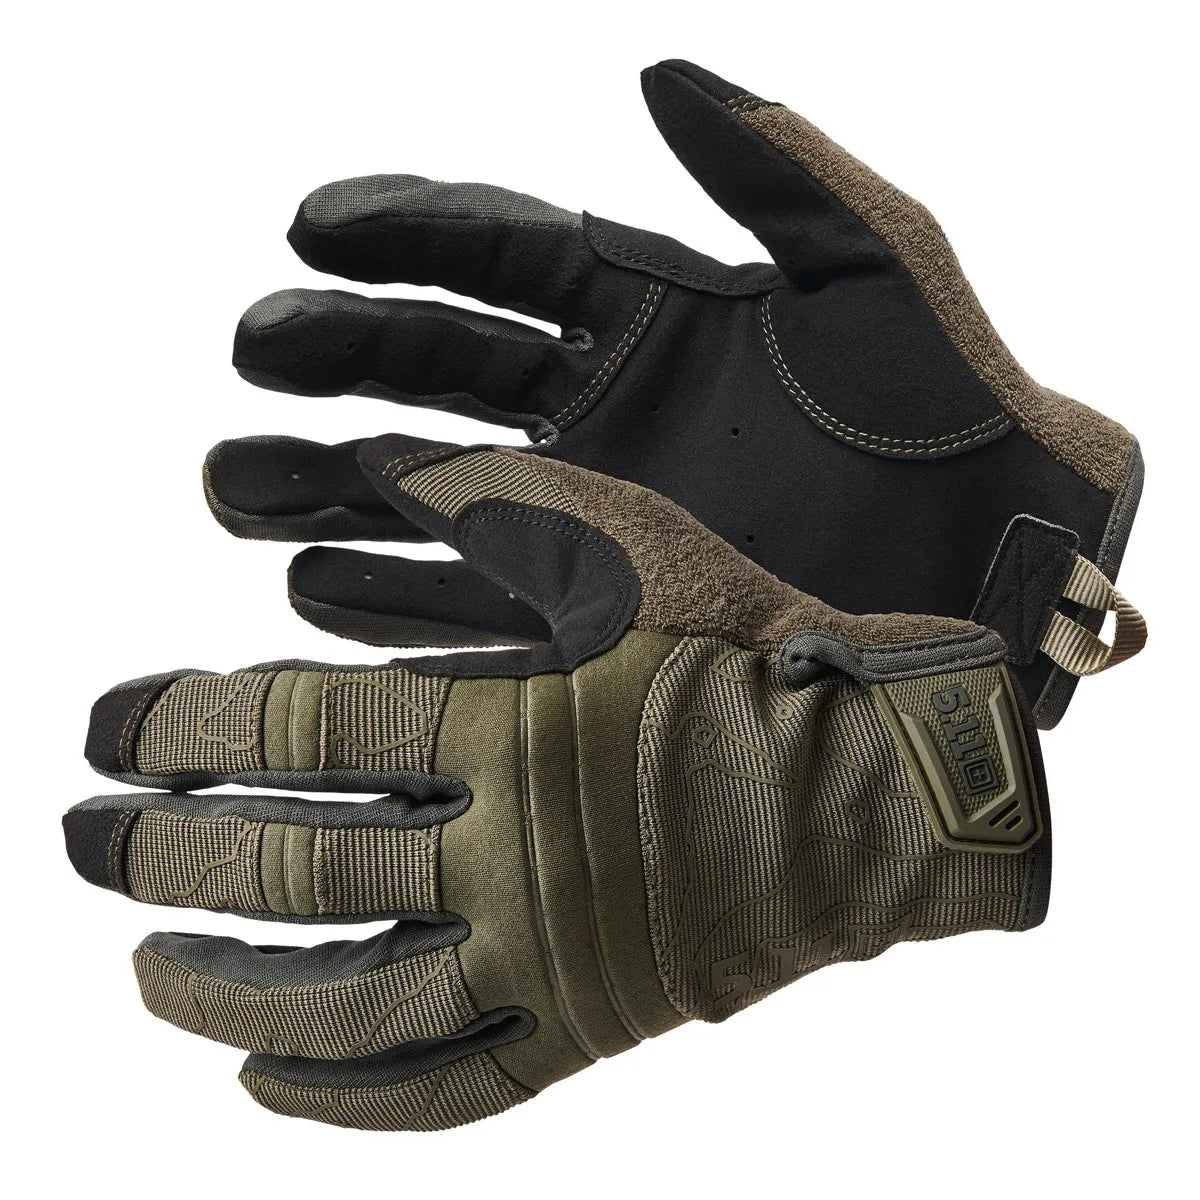 5.11 Tactical Competition Shooting 2.0 Glove